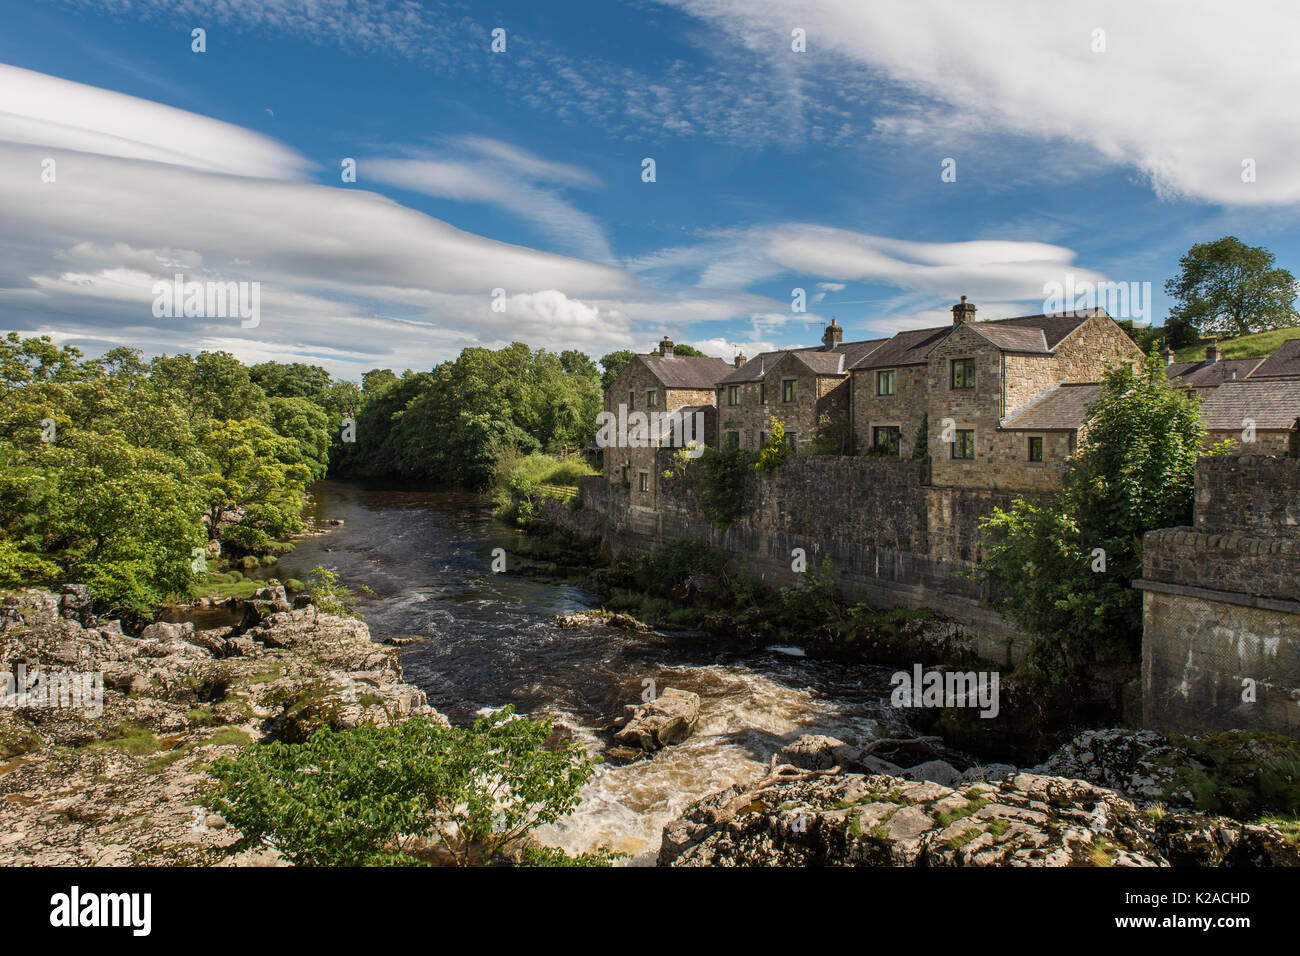 Blue sky over cascading water & riverside houses at sunny, scenic Linton Falls waterfall over River Wharfe, Grassington, Yorkshire Dales, England, UK. Stock Photo